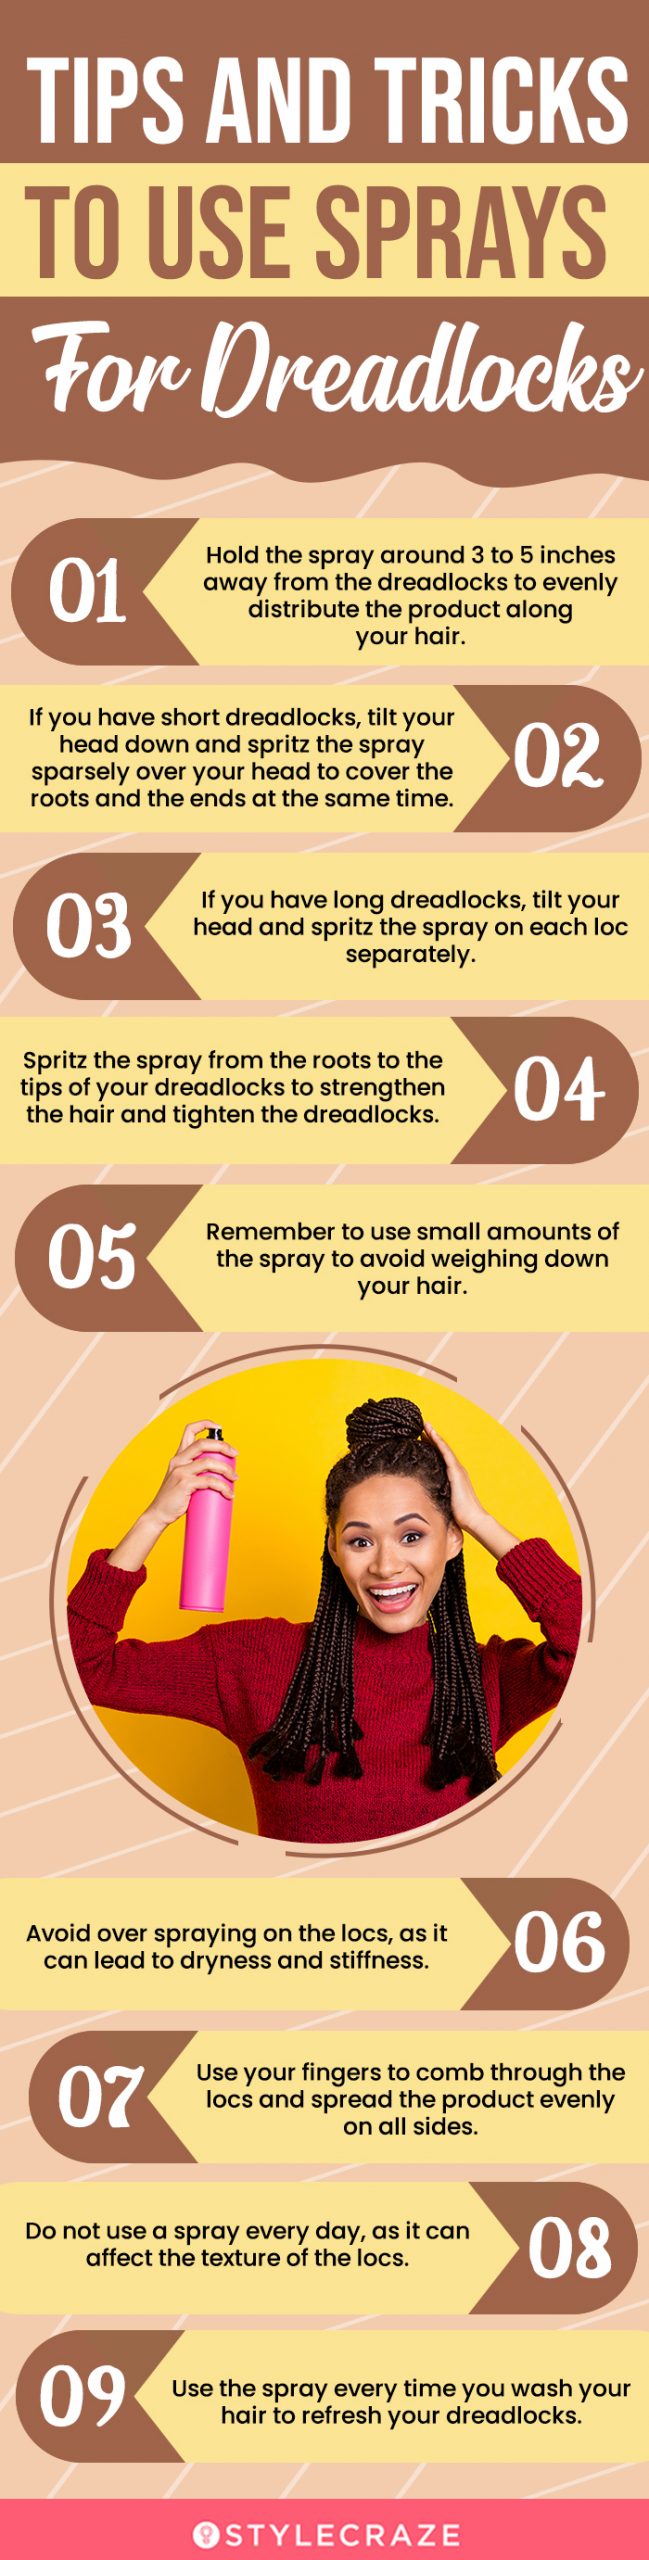 Tips And Tricks To Use Spray For Dreadlocks (infographic)